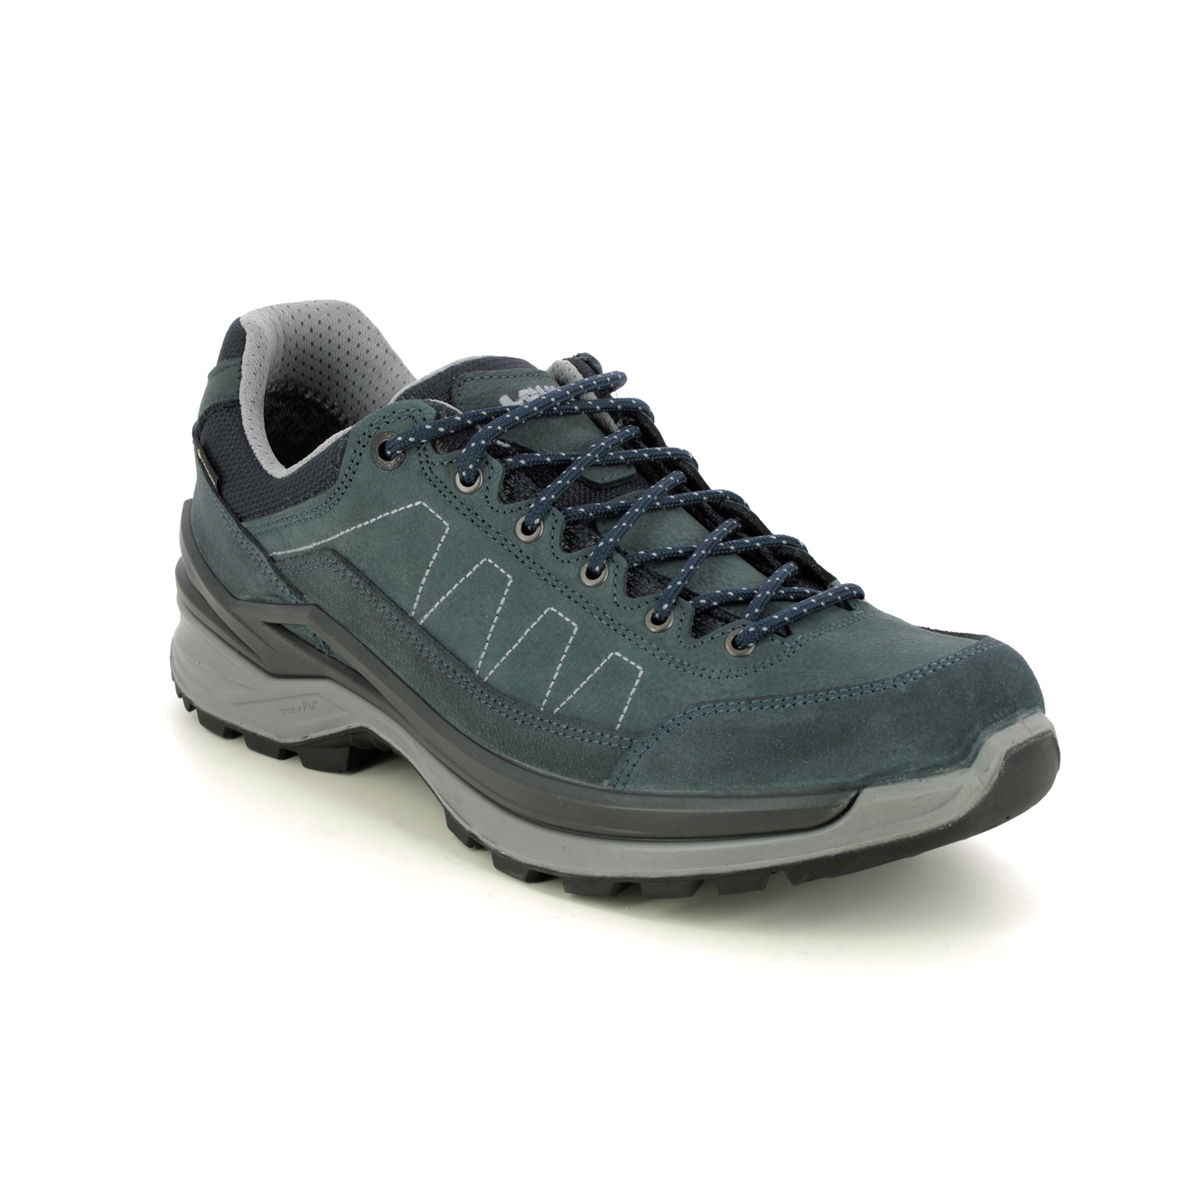 Lowa Toro Pro Gtx Lo Mens Walking Shoes In Navy Leather 310931-6130 In Regular Fit Mens Uk Size 10 In Plain Navy Leather